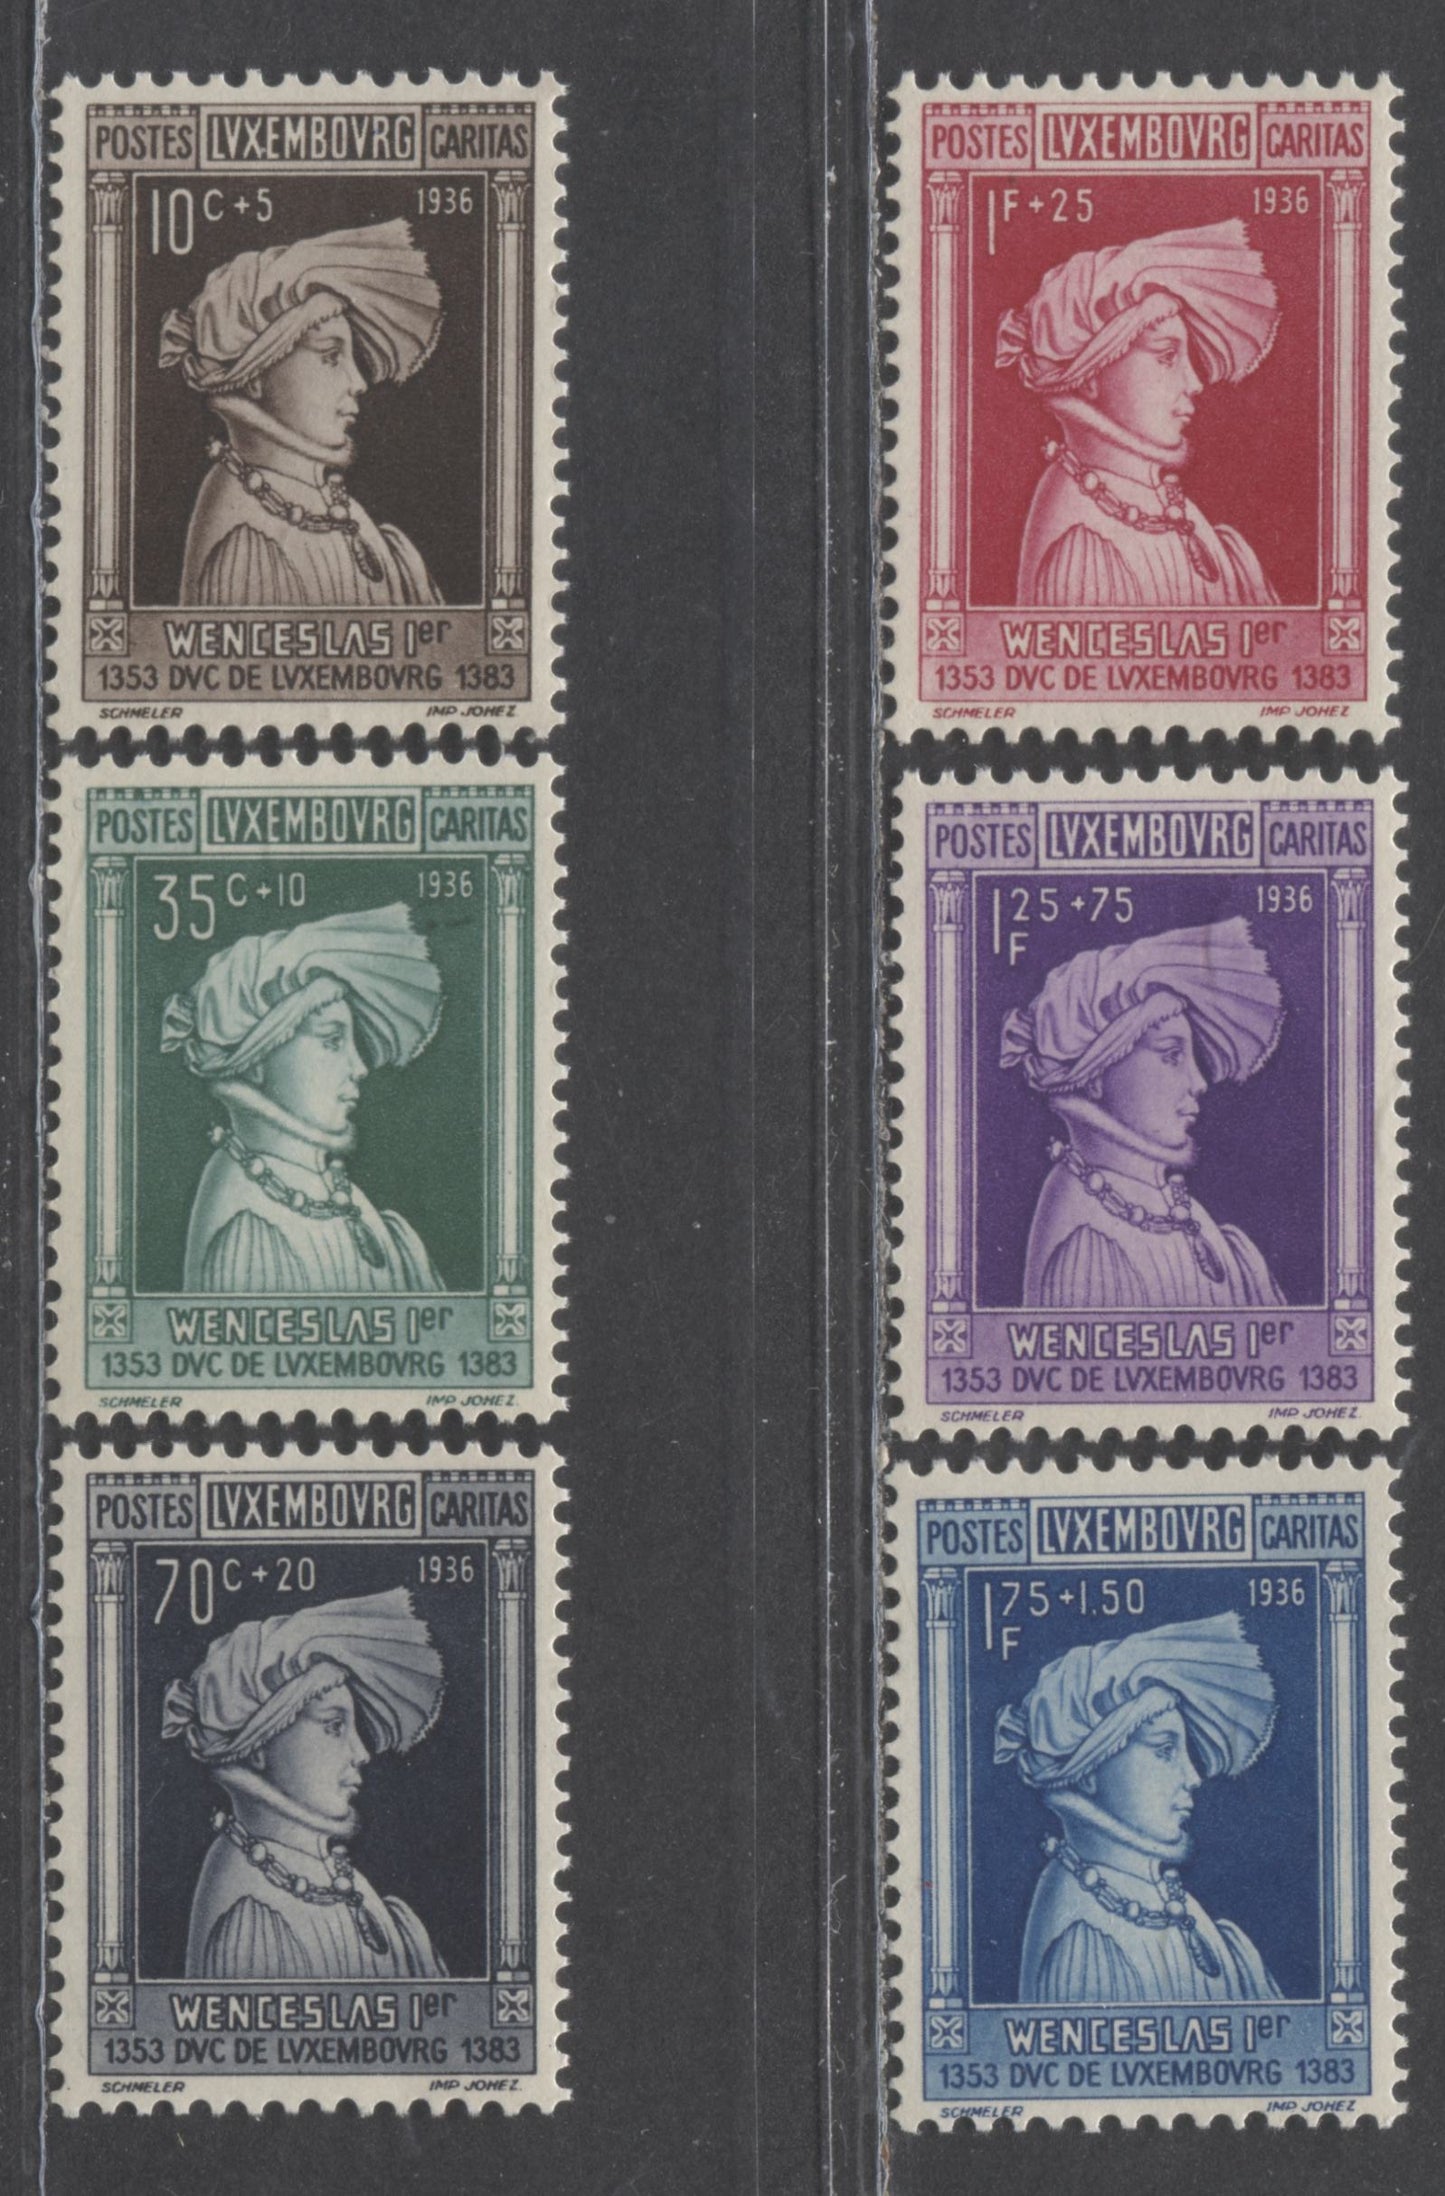 Lot 462 Luxembourg SC#B73-B78 1936 Wenceslas I Semi Postals, 6 VFNH Singles, Click on Listing to See ALL Pictures, 2022 Scott Classic Cat. $32.5 USD